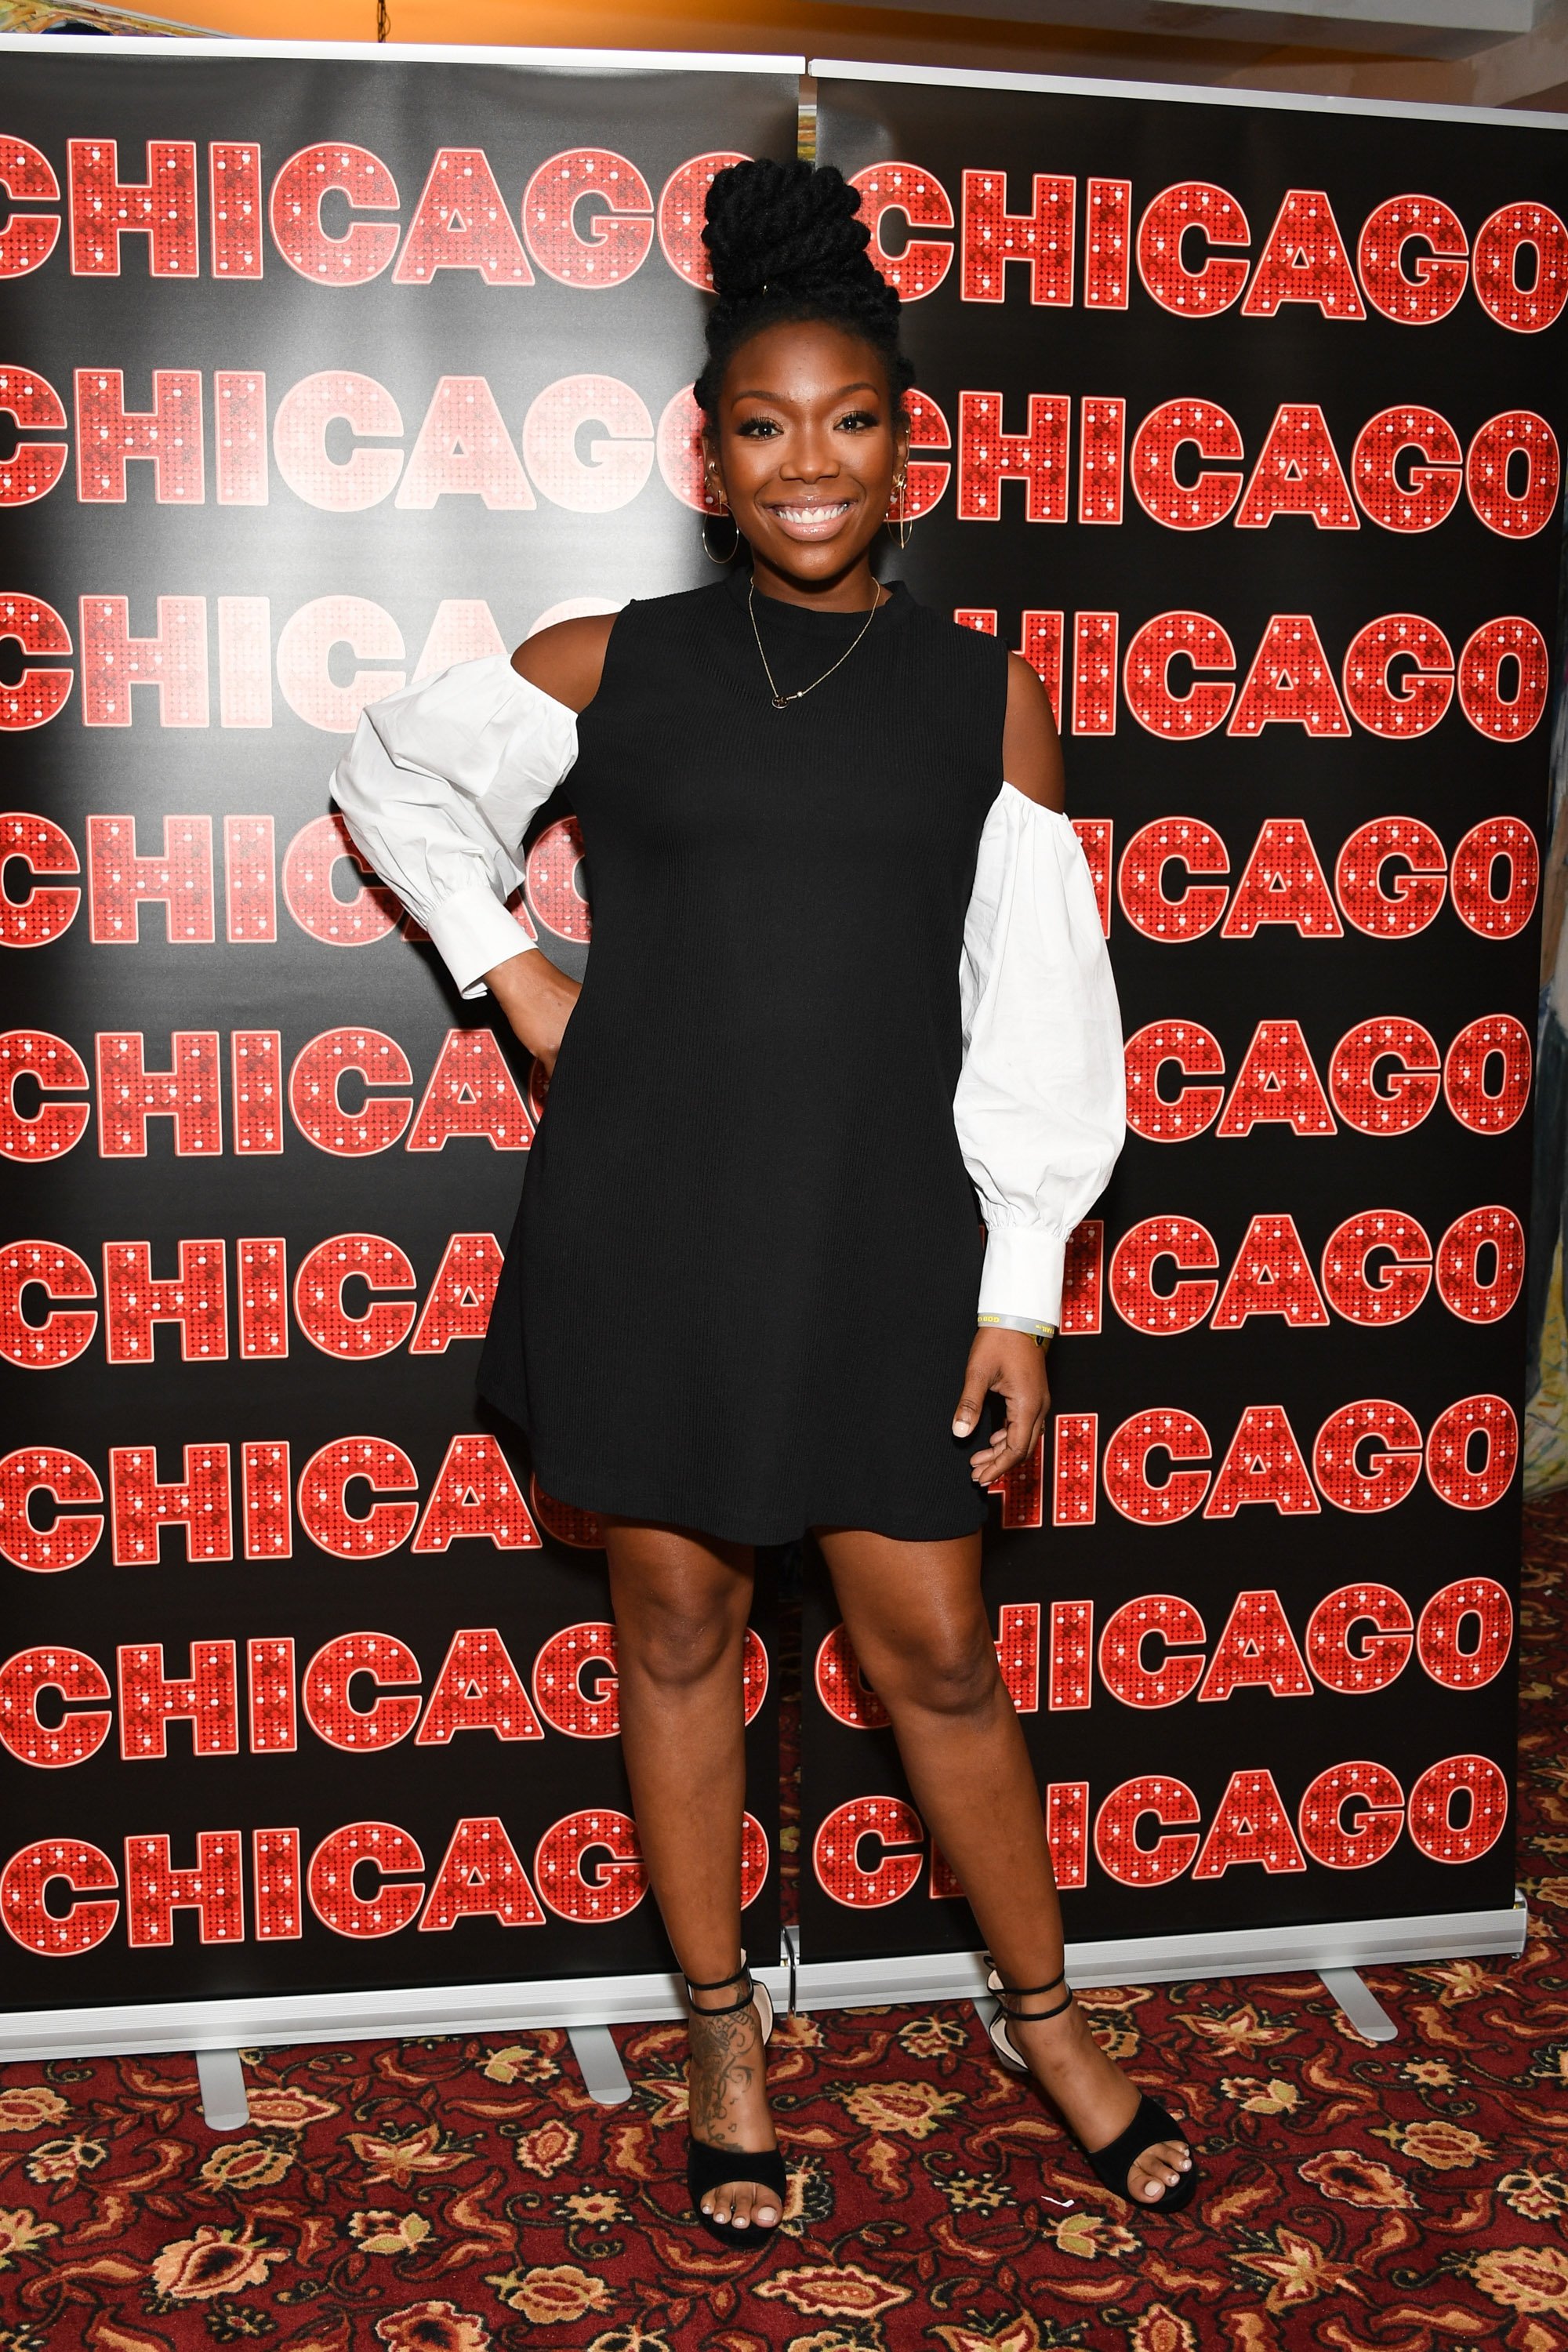 Brandy attends a press event for her return to Broadway's "Chicago" in New York City in August 2017. I Image: Getty Images.